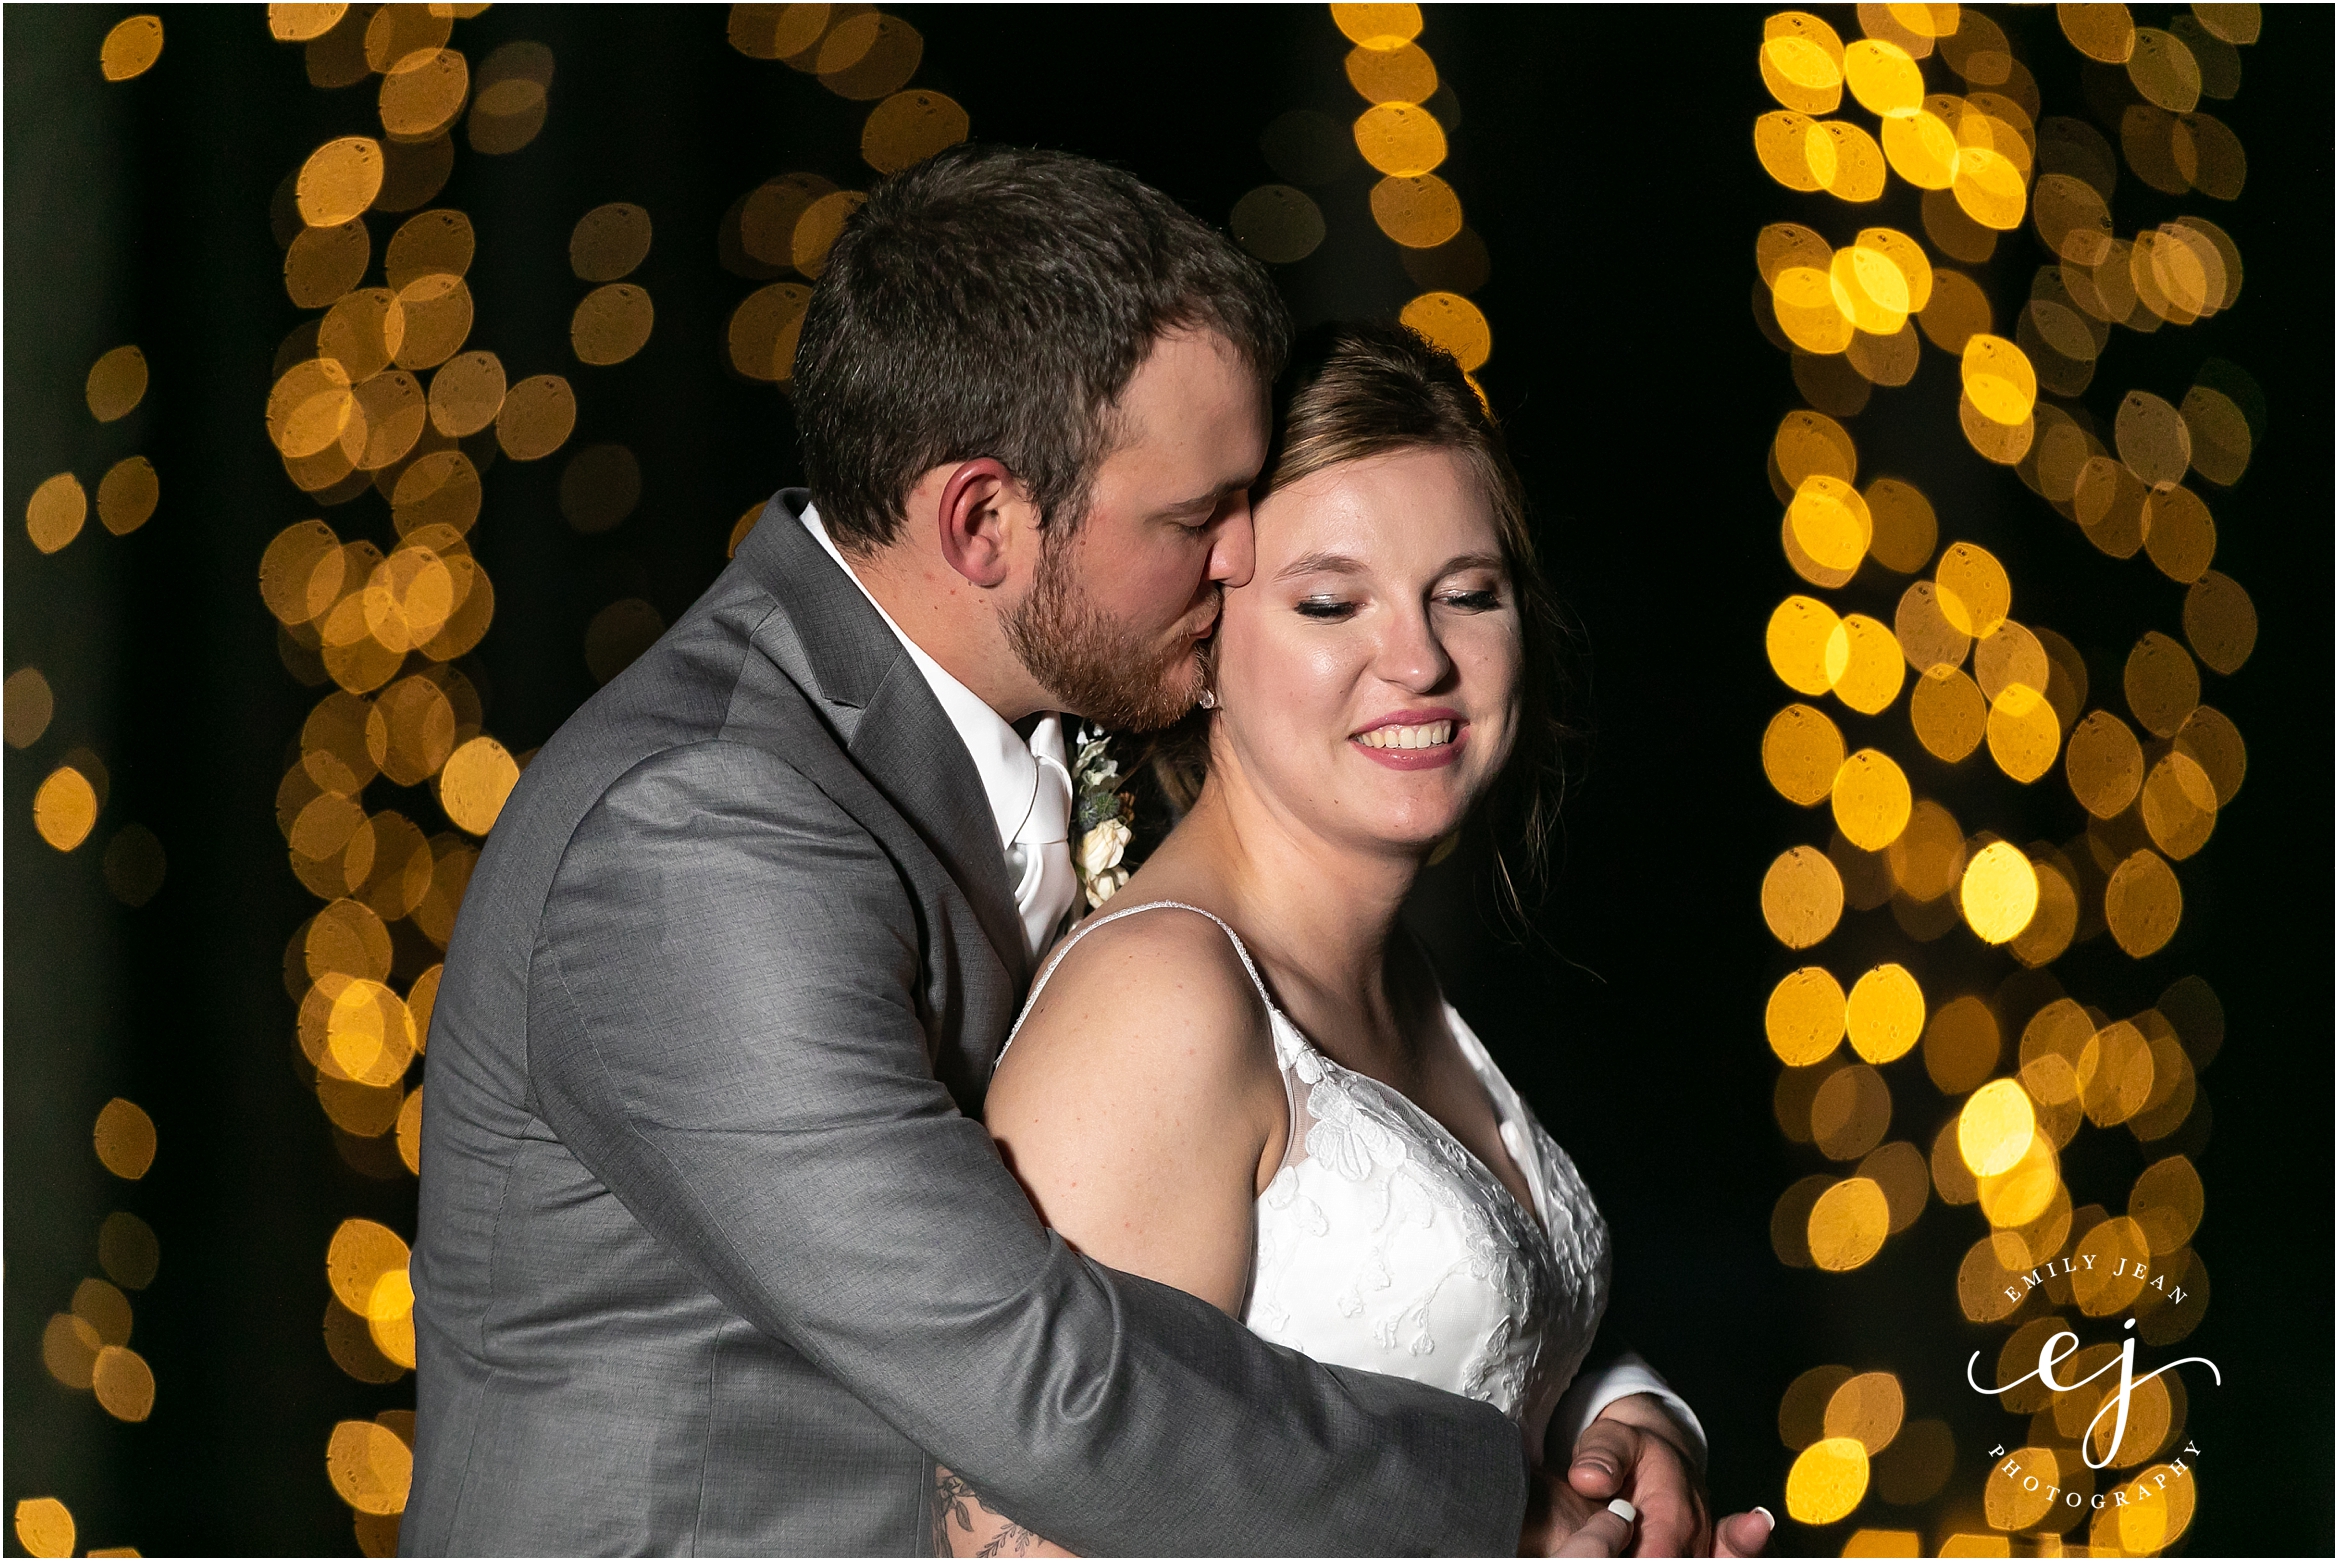 Celebrations on the River Photographer Bride and Groom with twinkle lights